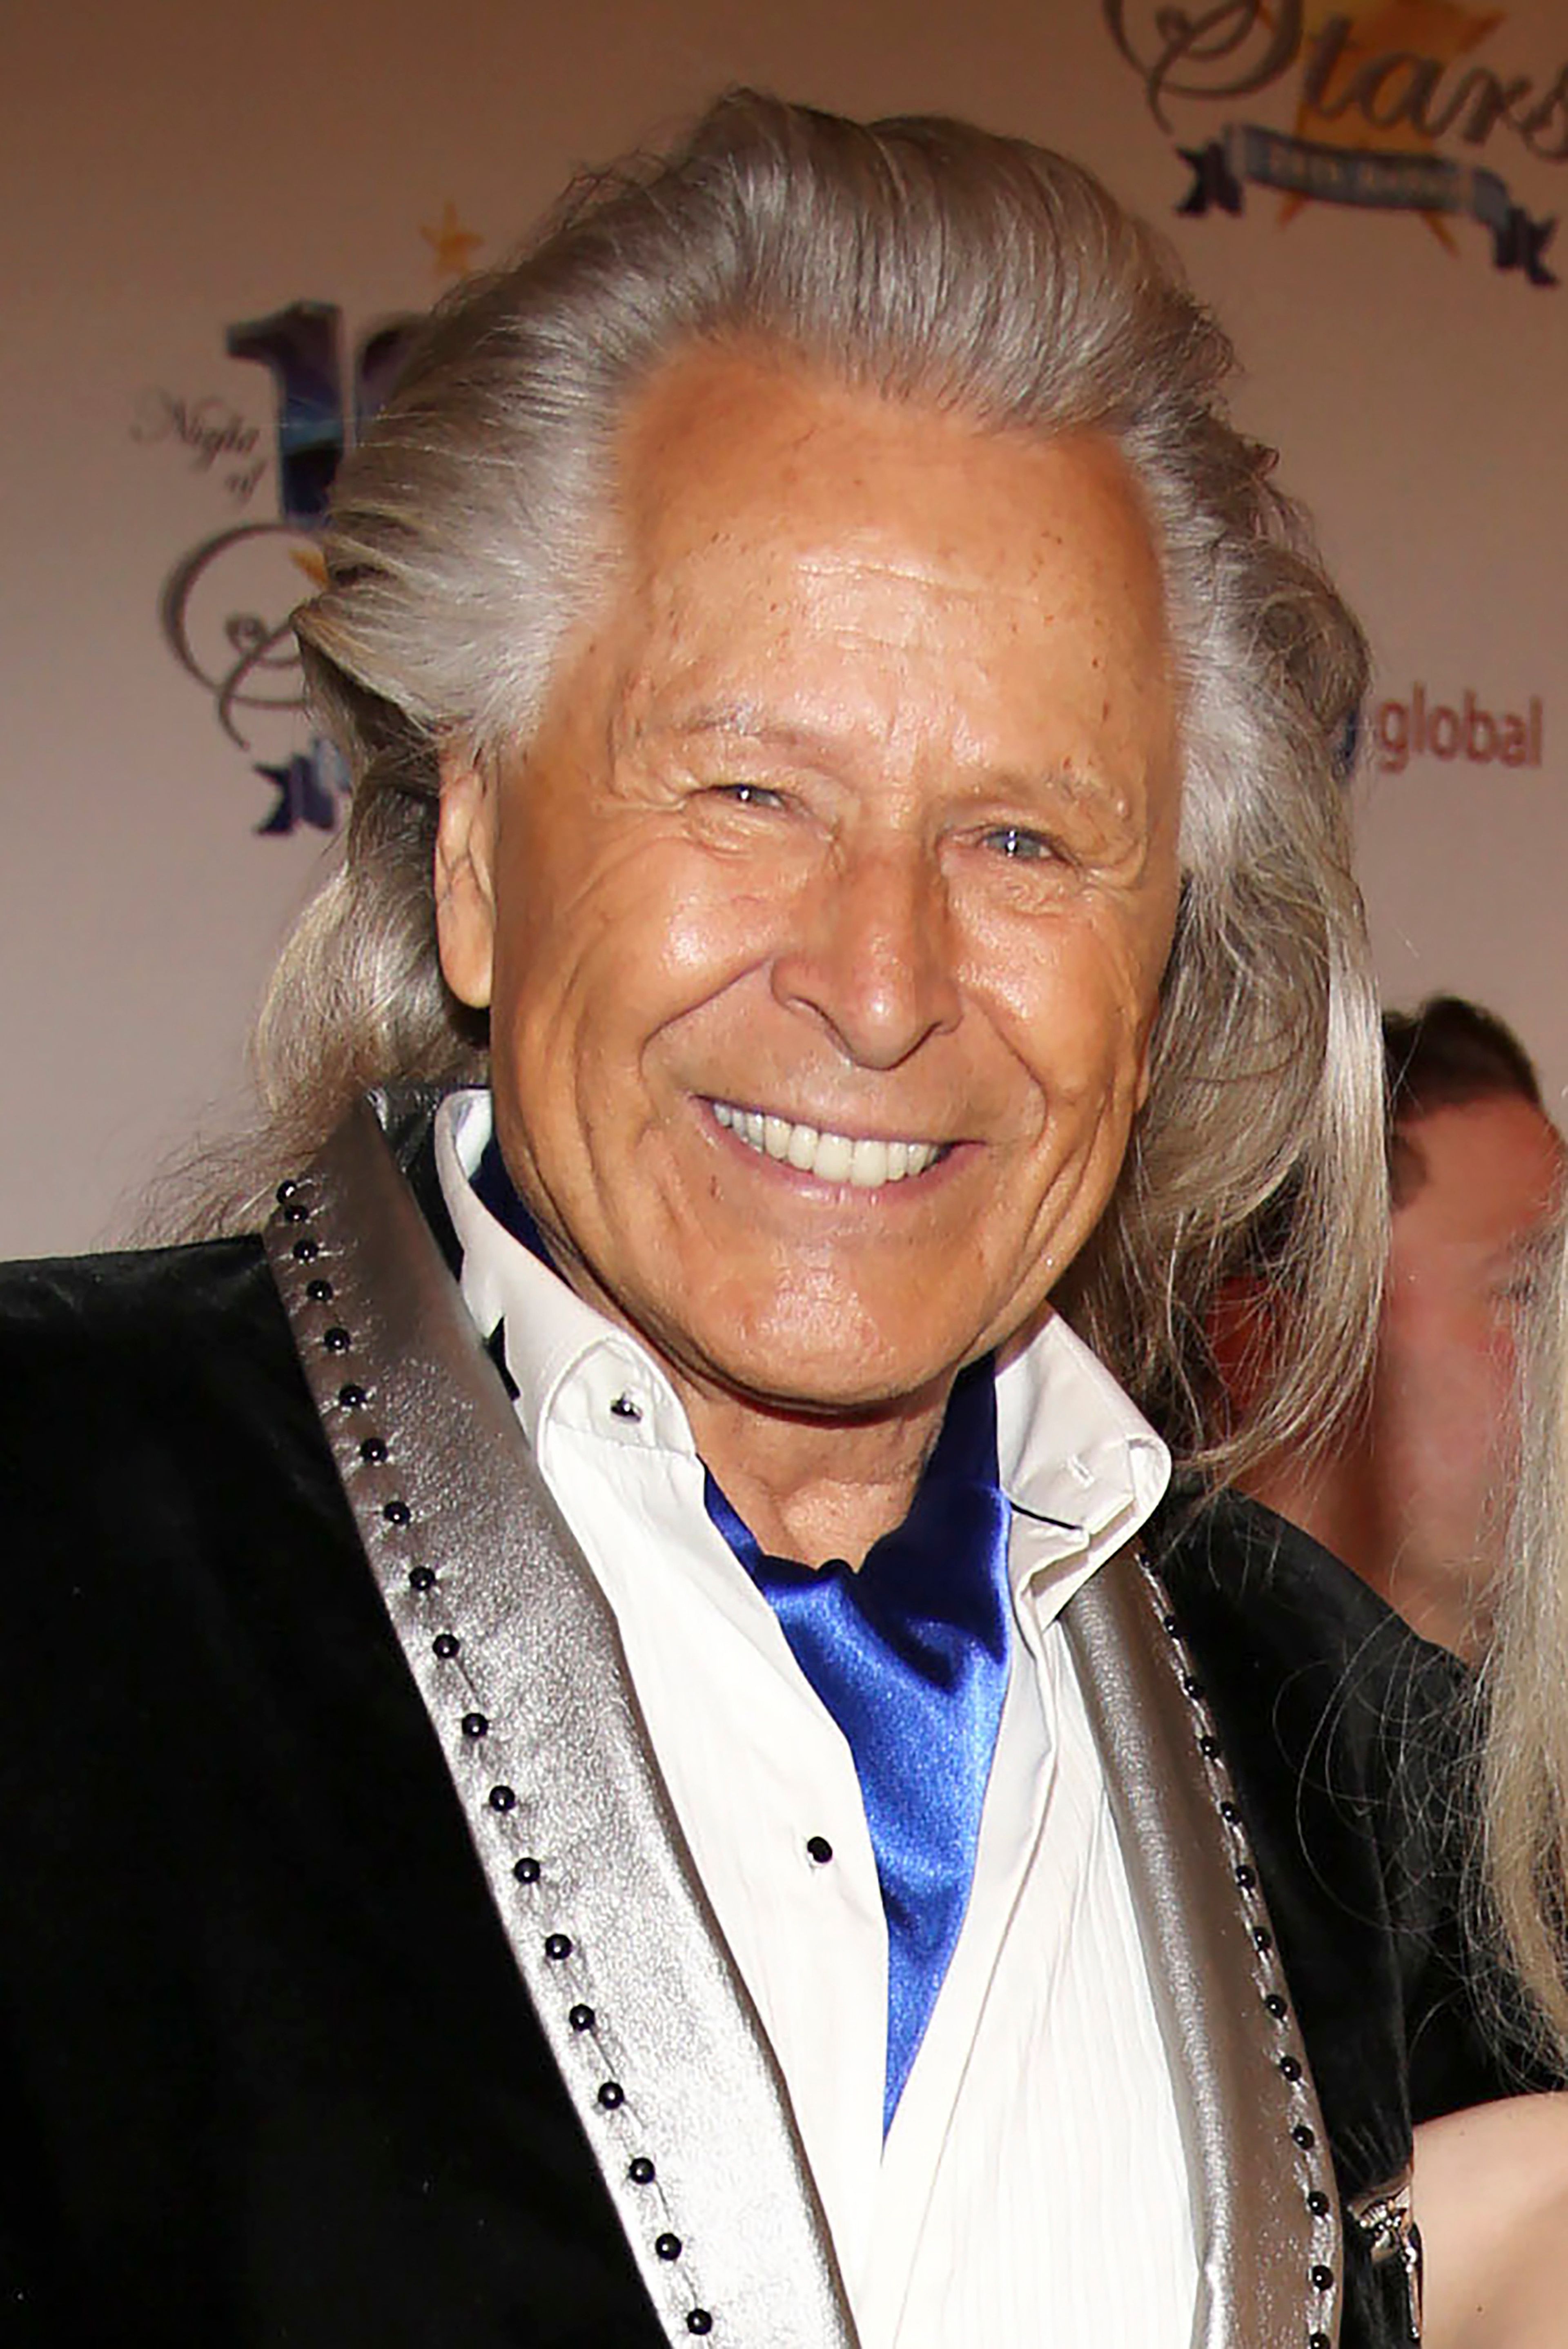 Fashion mogul Peter Nygard arrested in Canada on sex charges The Seattle Times